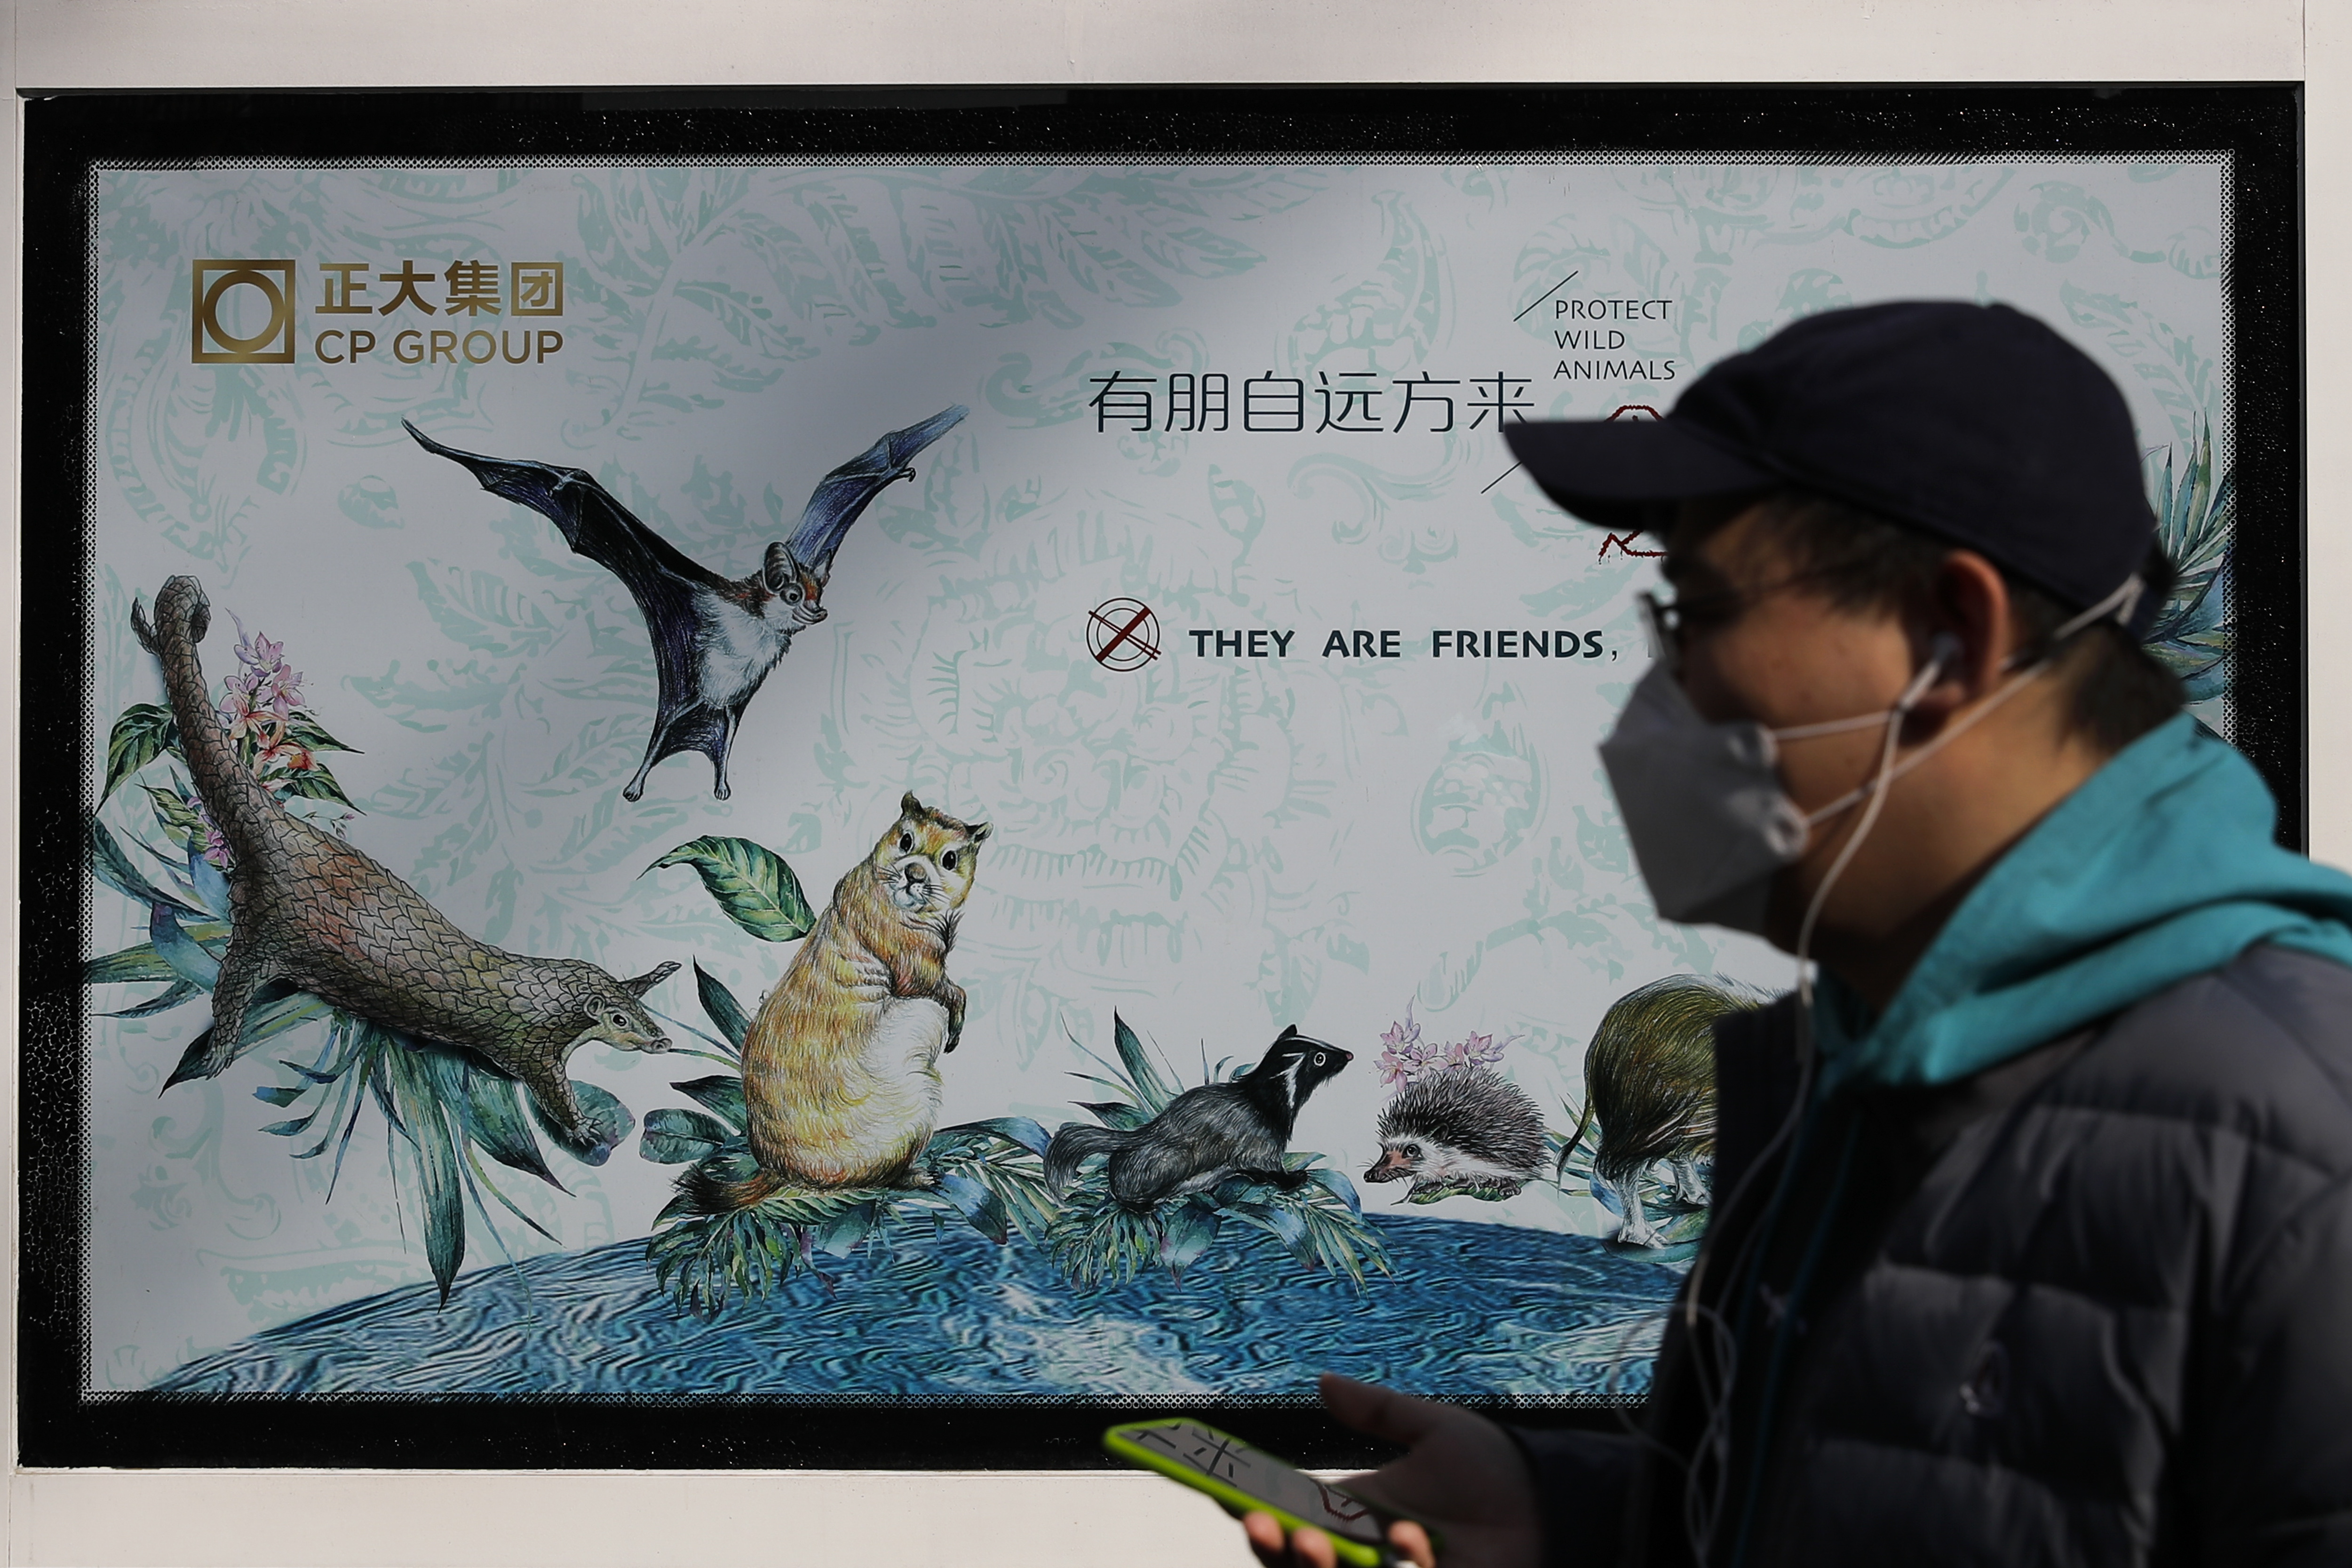 Propaganda posters promote the protection of wildlife after authorities crackdown on animal markets following the coronavirus outbreak.